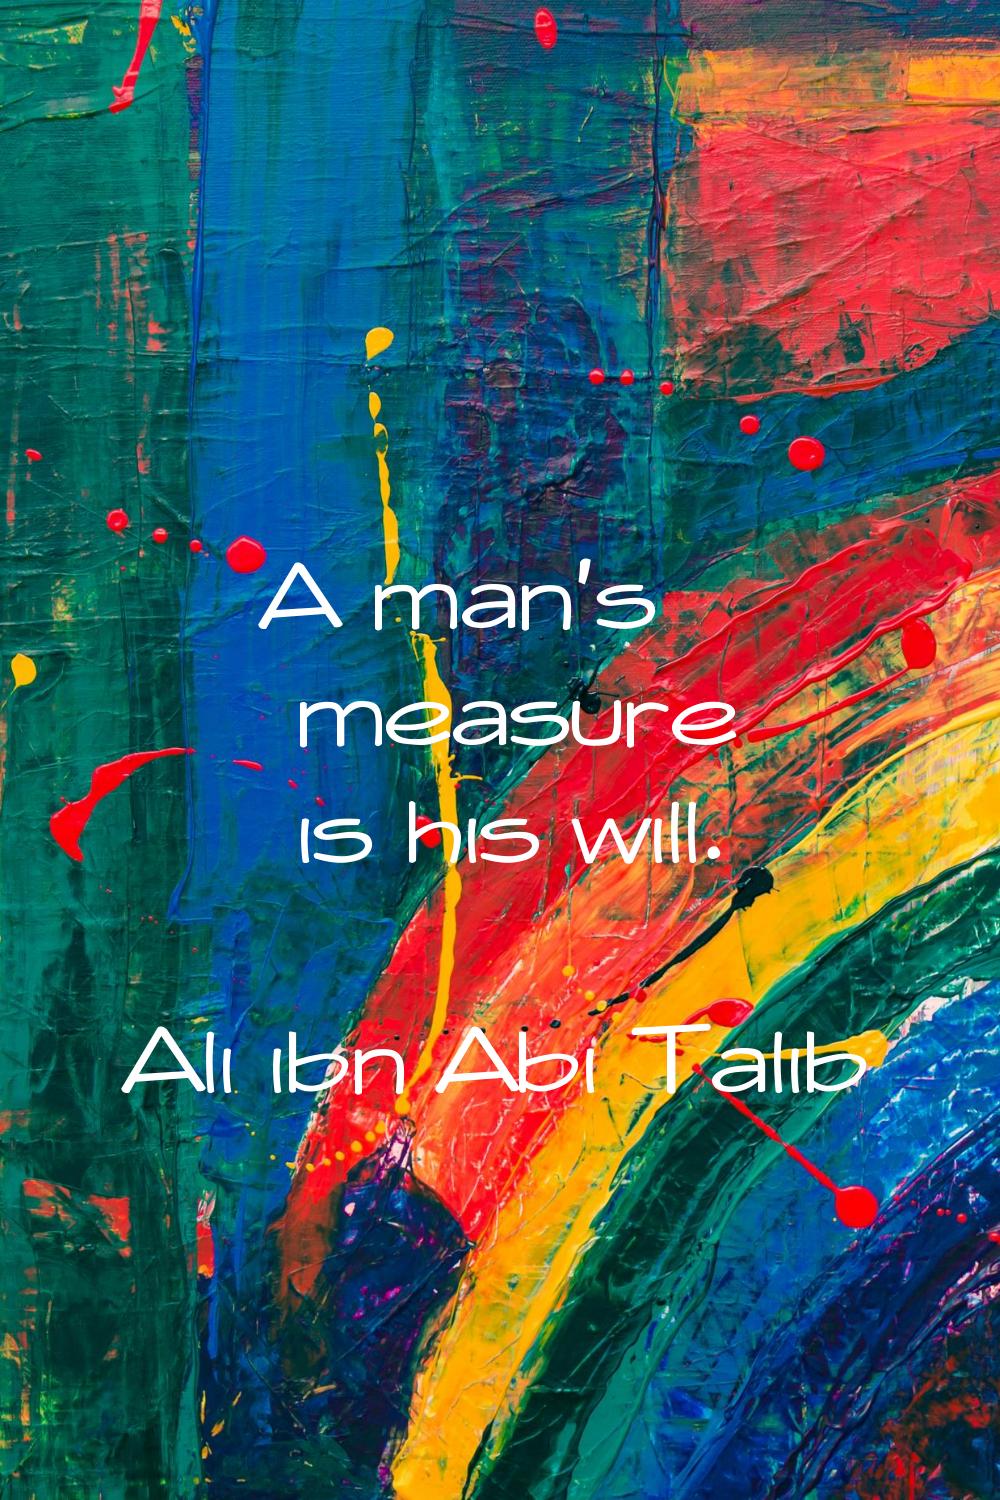 A man's measure is his will.